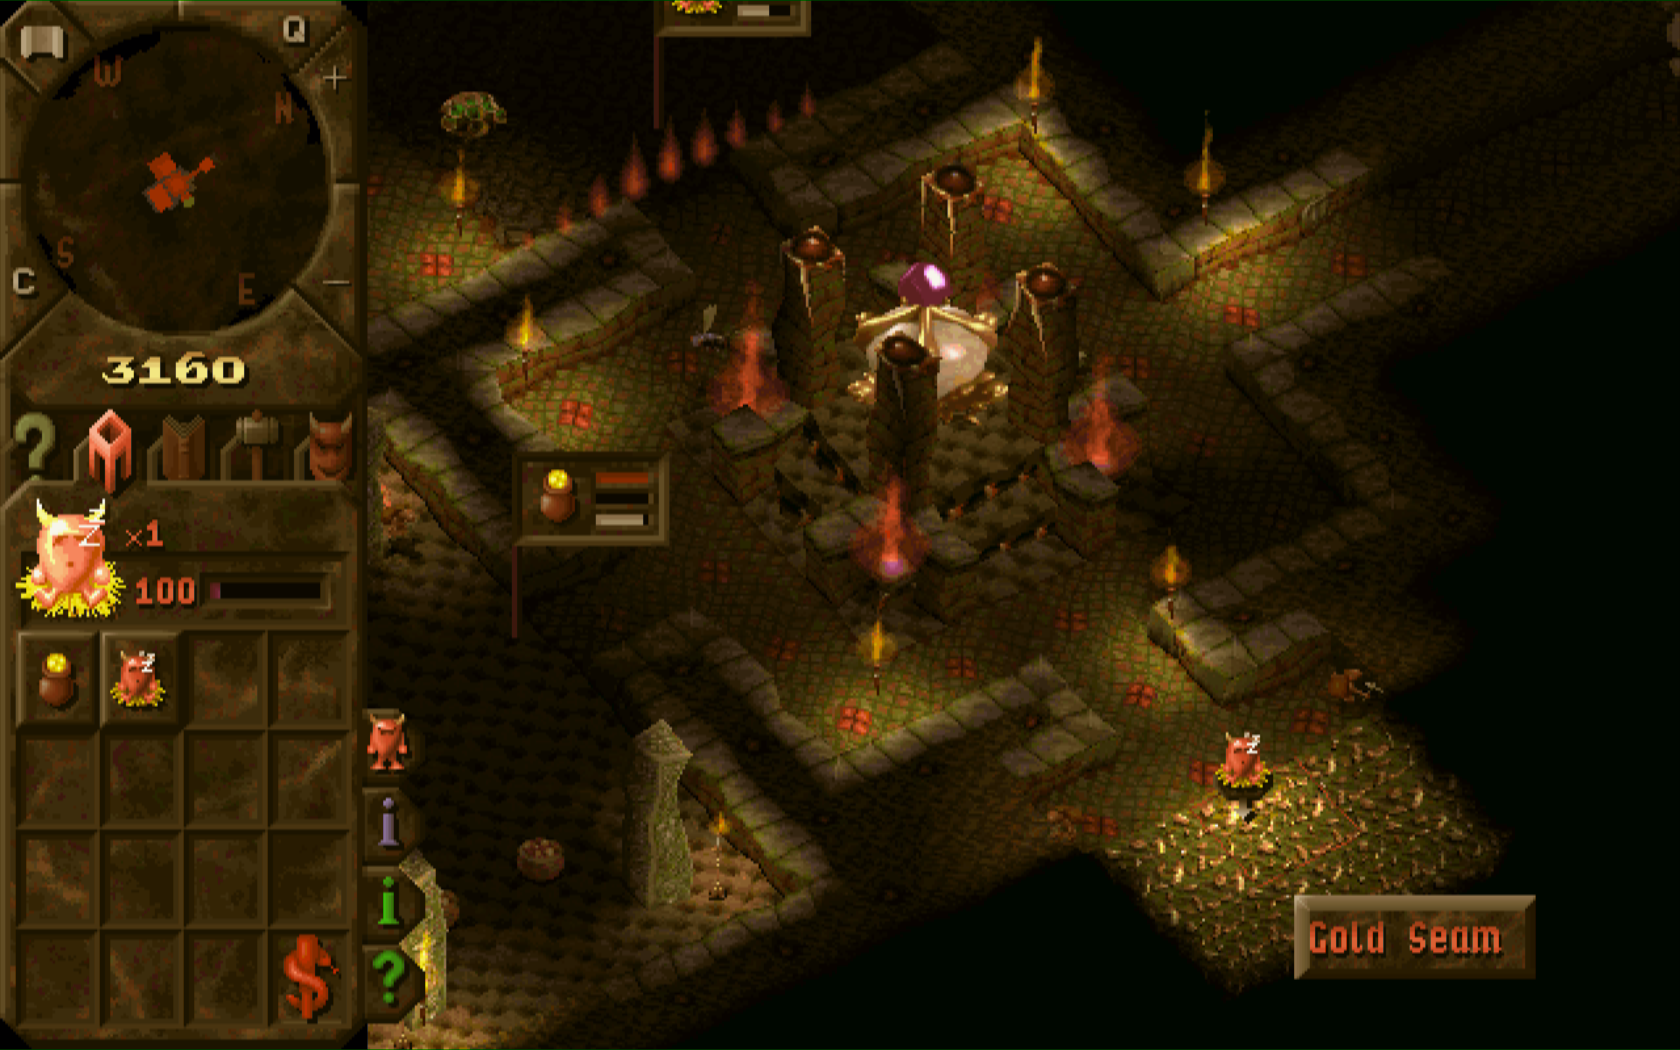 Dungeon Keeper source port “KeeperFX” celebrates full 1.0 release